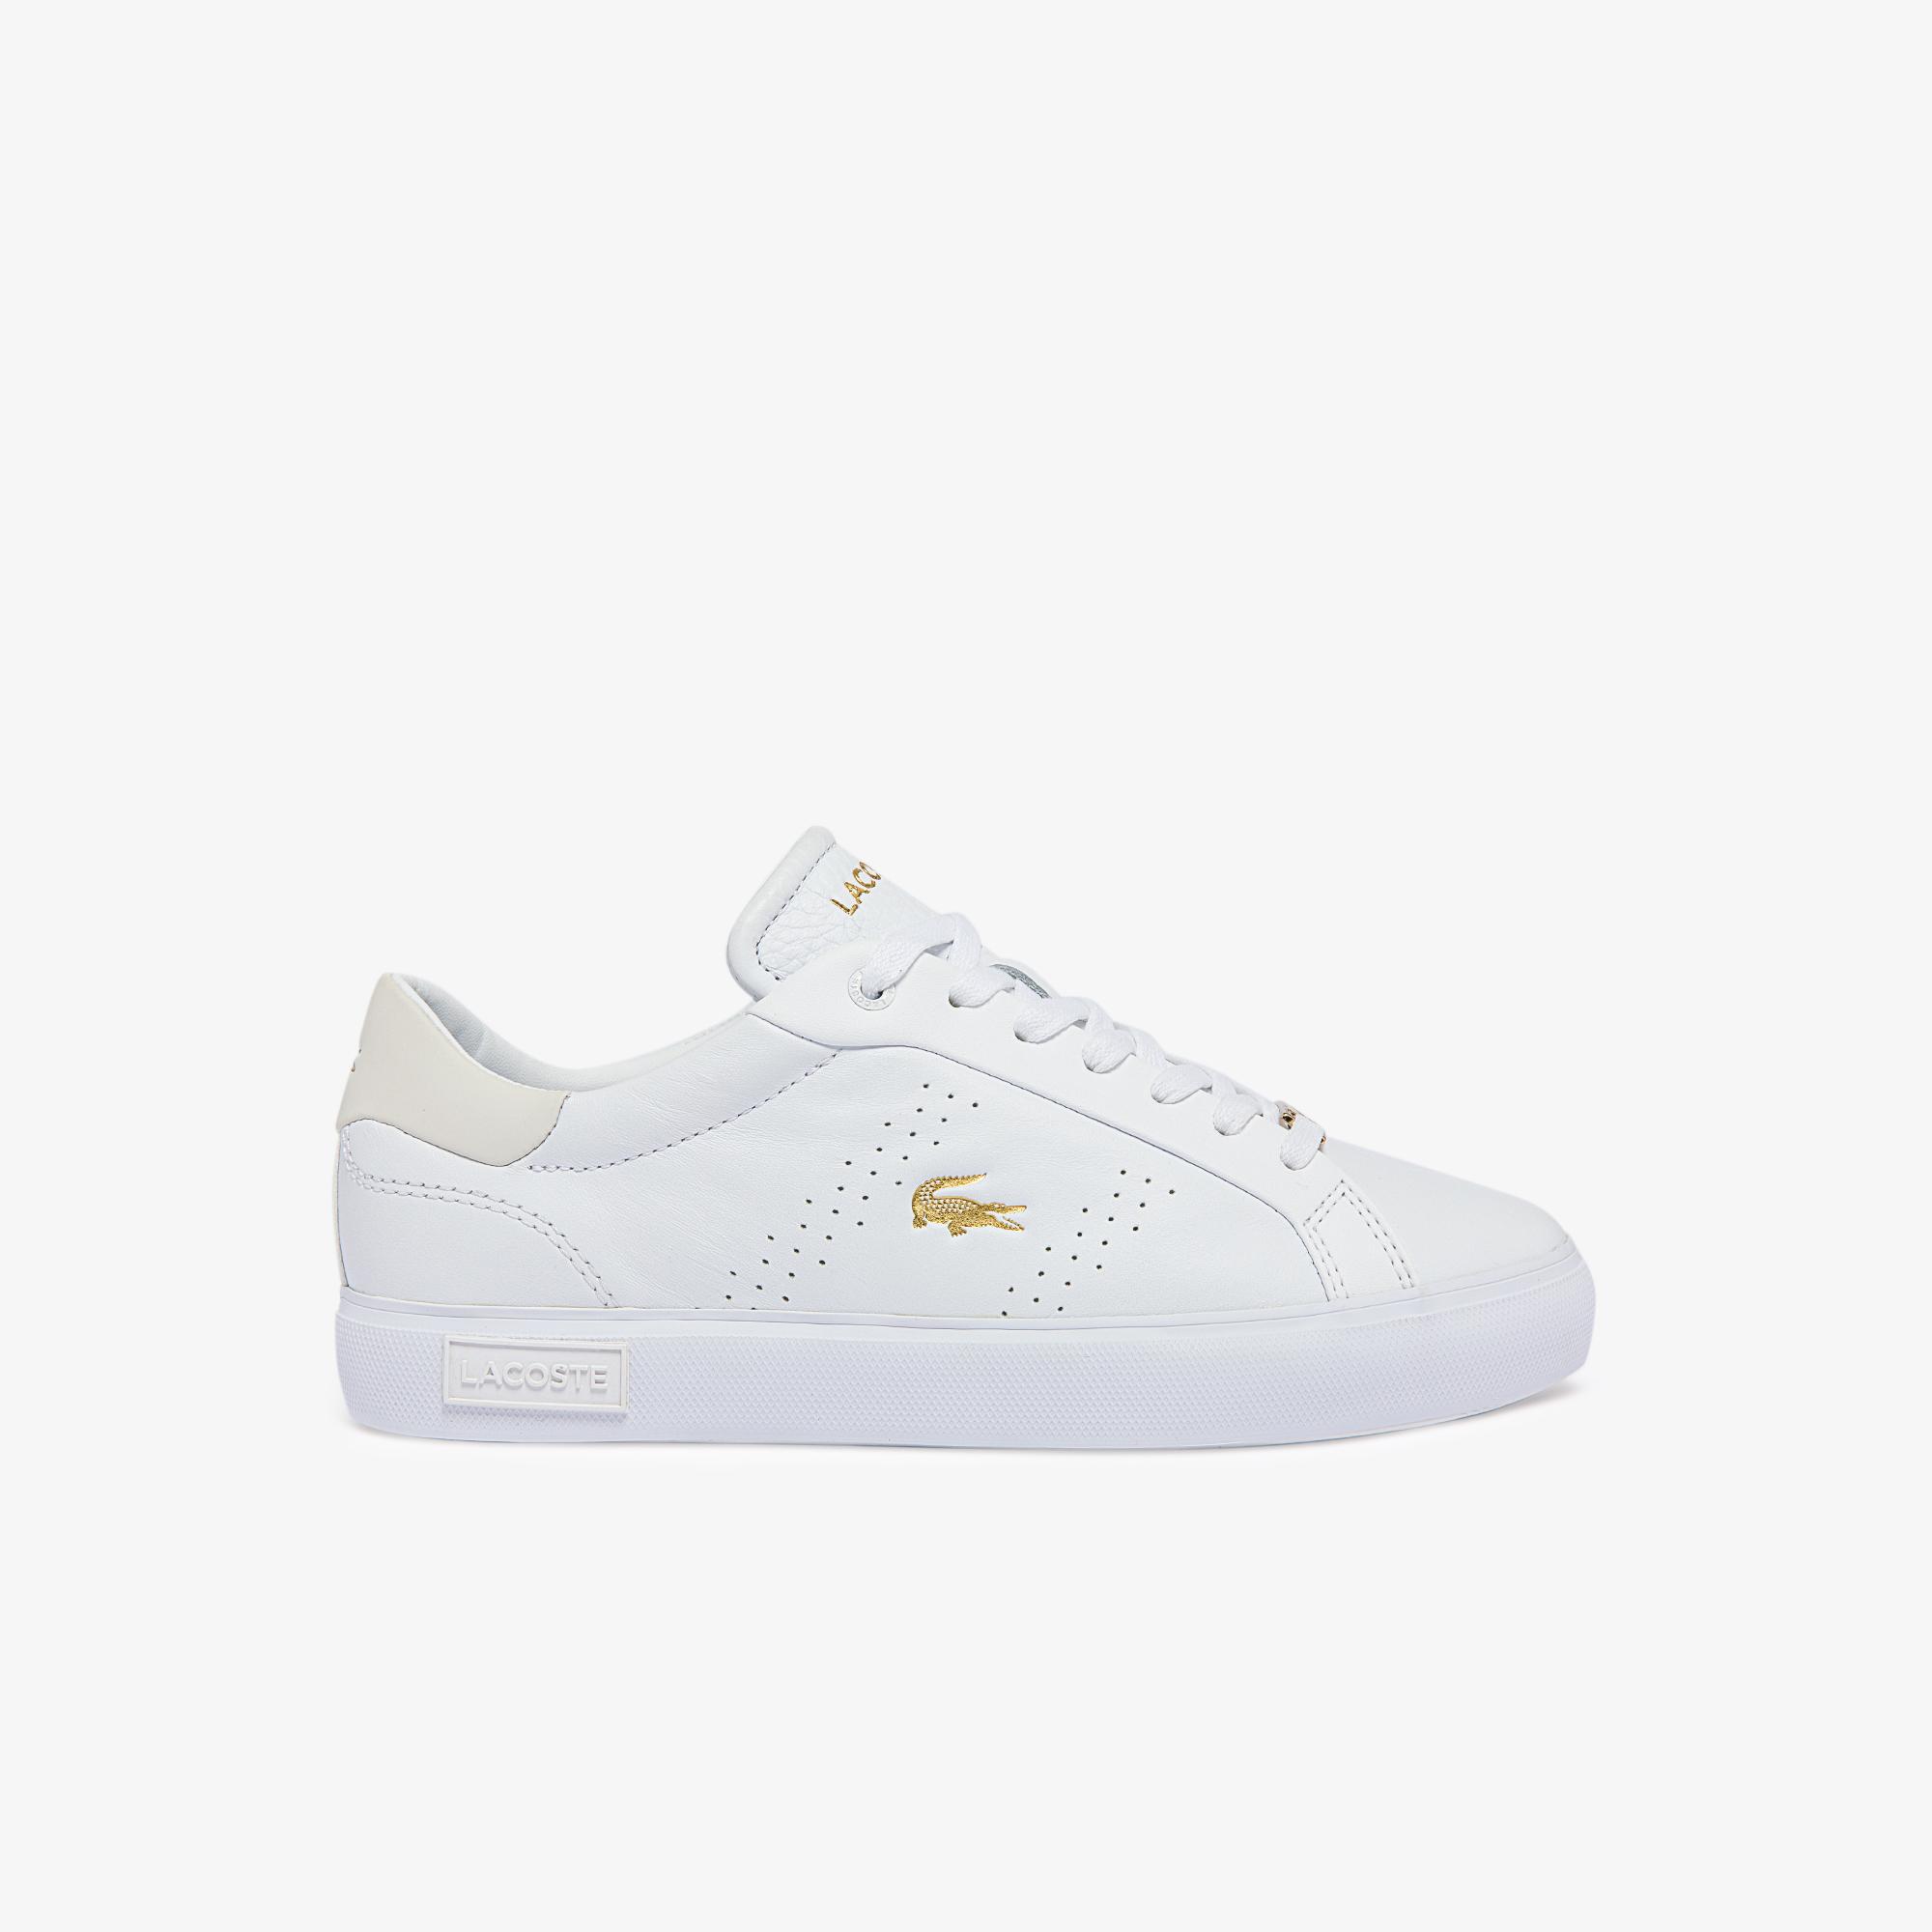 Lacoste Women's Powercourt 2.0 Leather Tonal Trainers